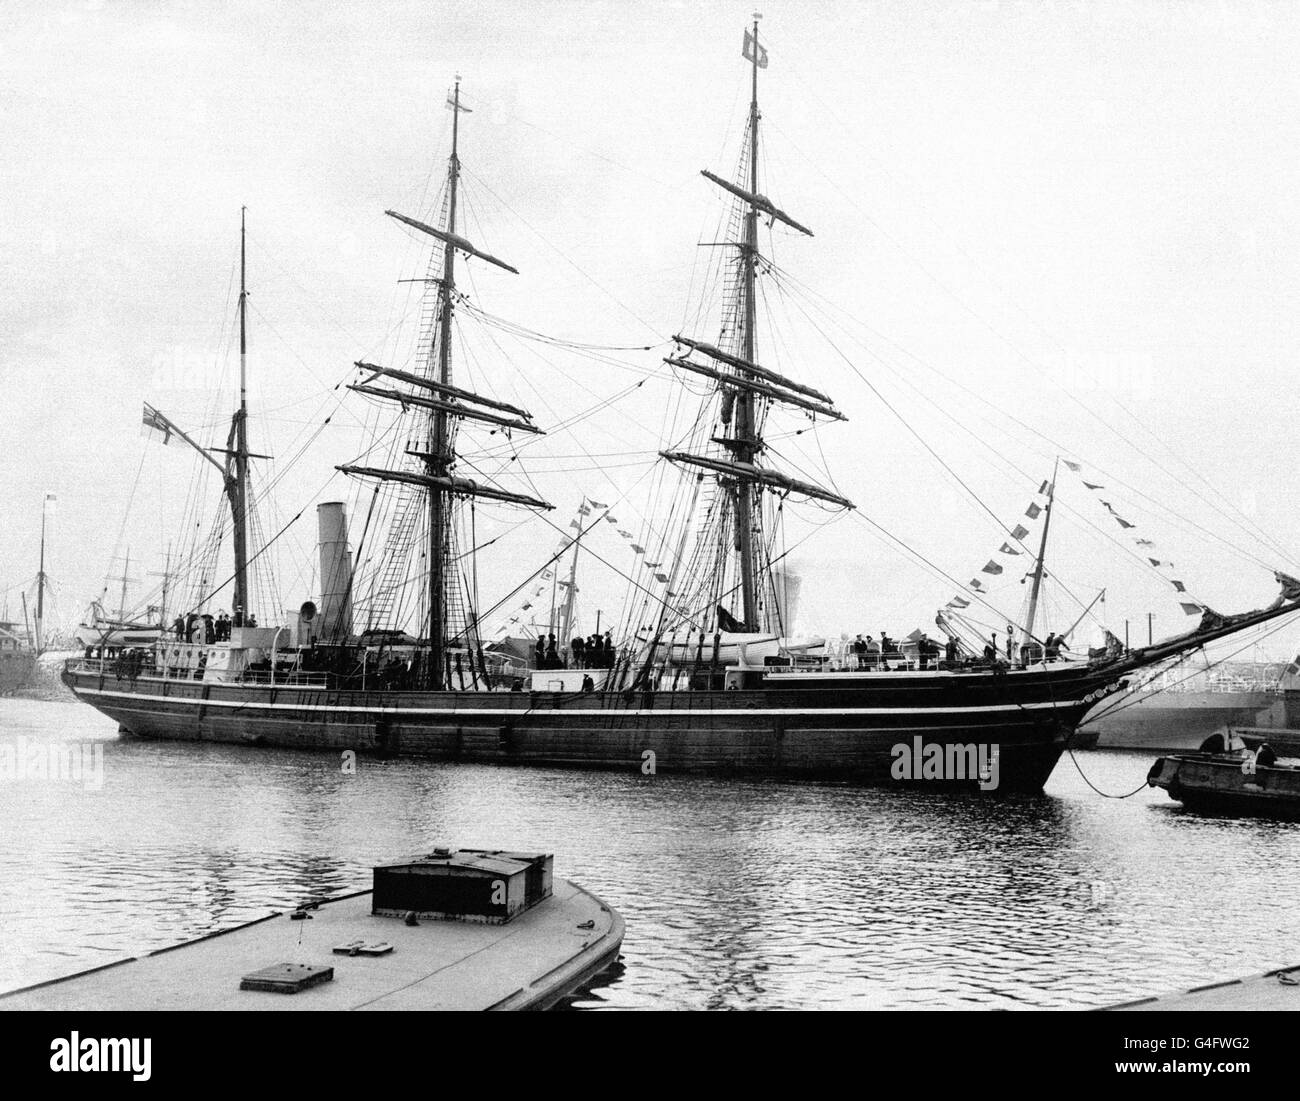 Captain Scott's ship, The Terra Nova, before he set sail on his ill-fated expedition to the South Pole. Stock Photo